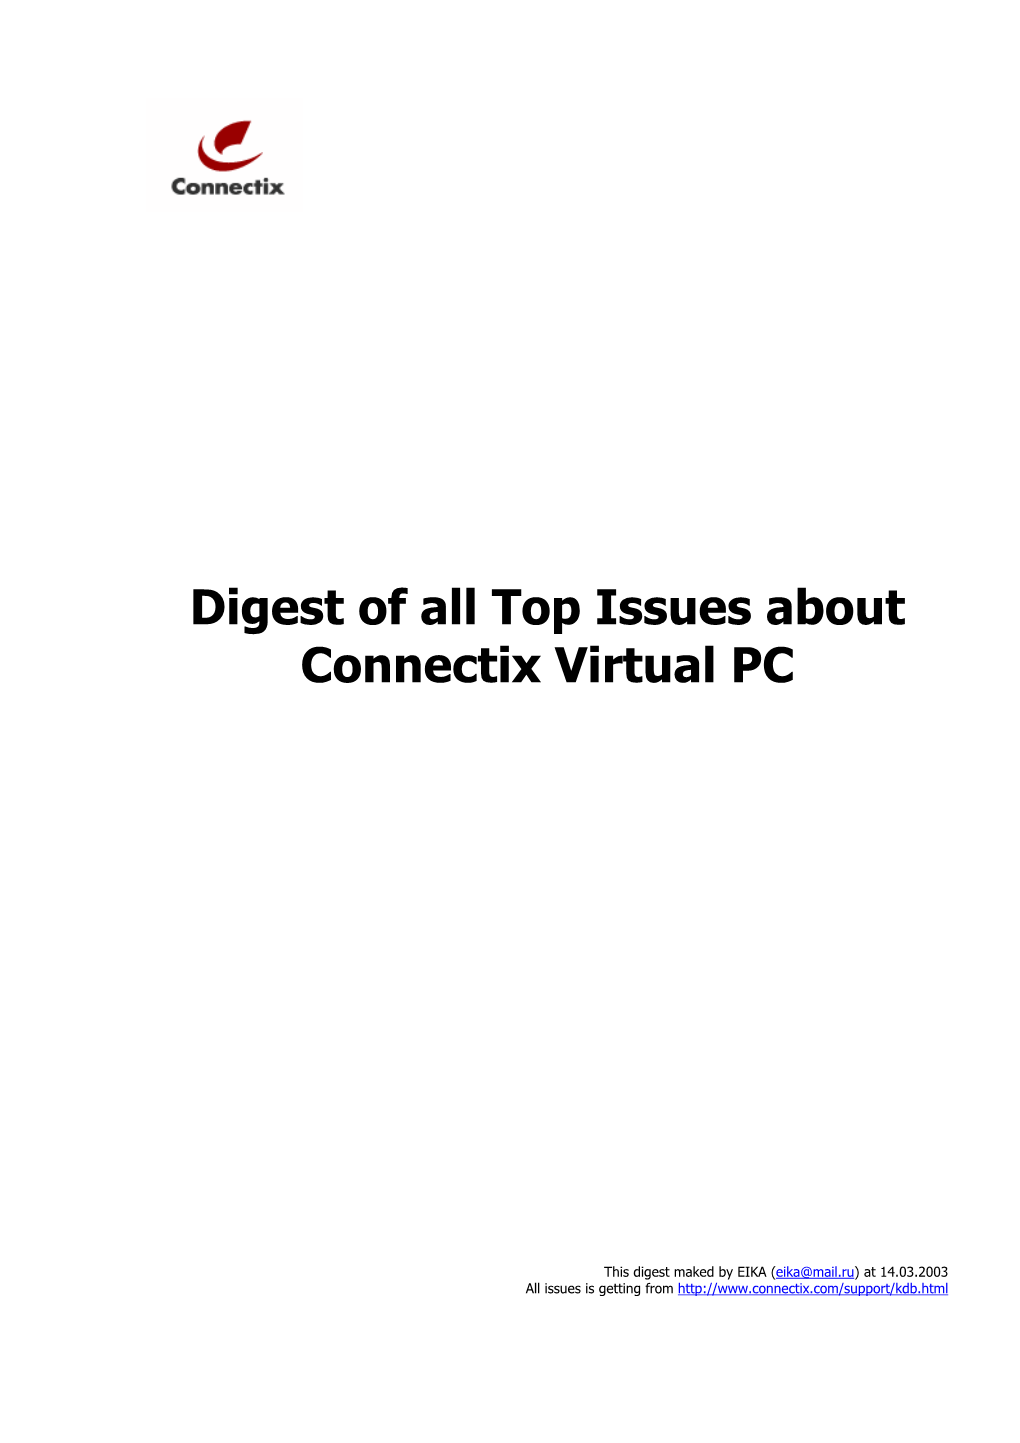 Digest of All Top Issues About Connectix Virtual PC